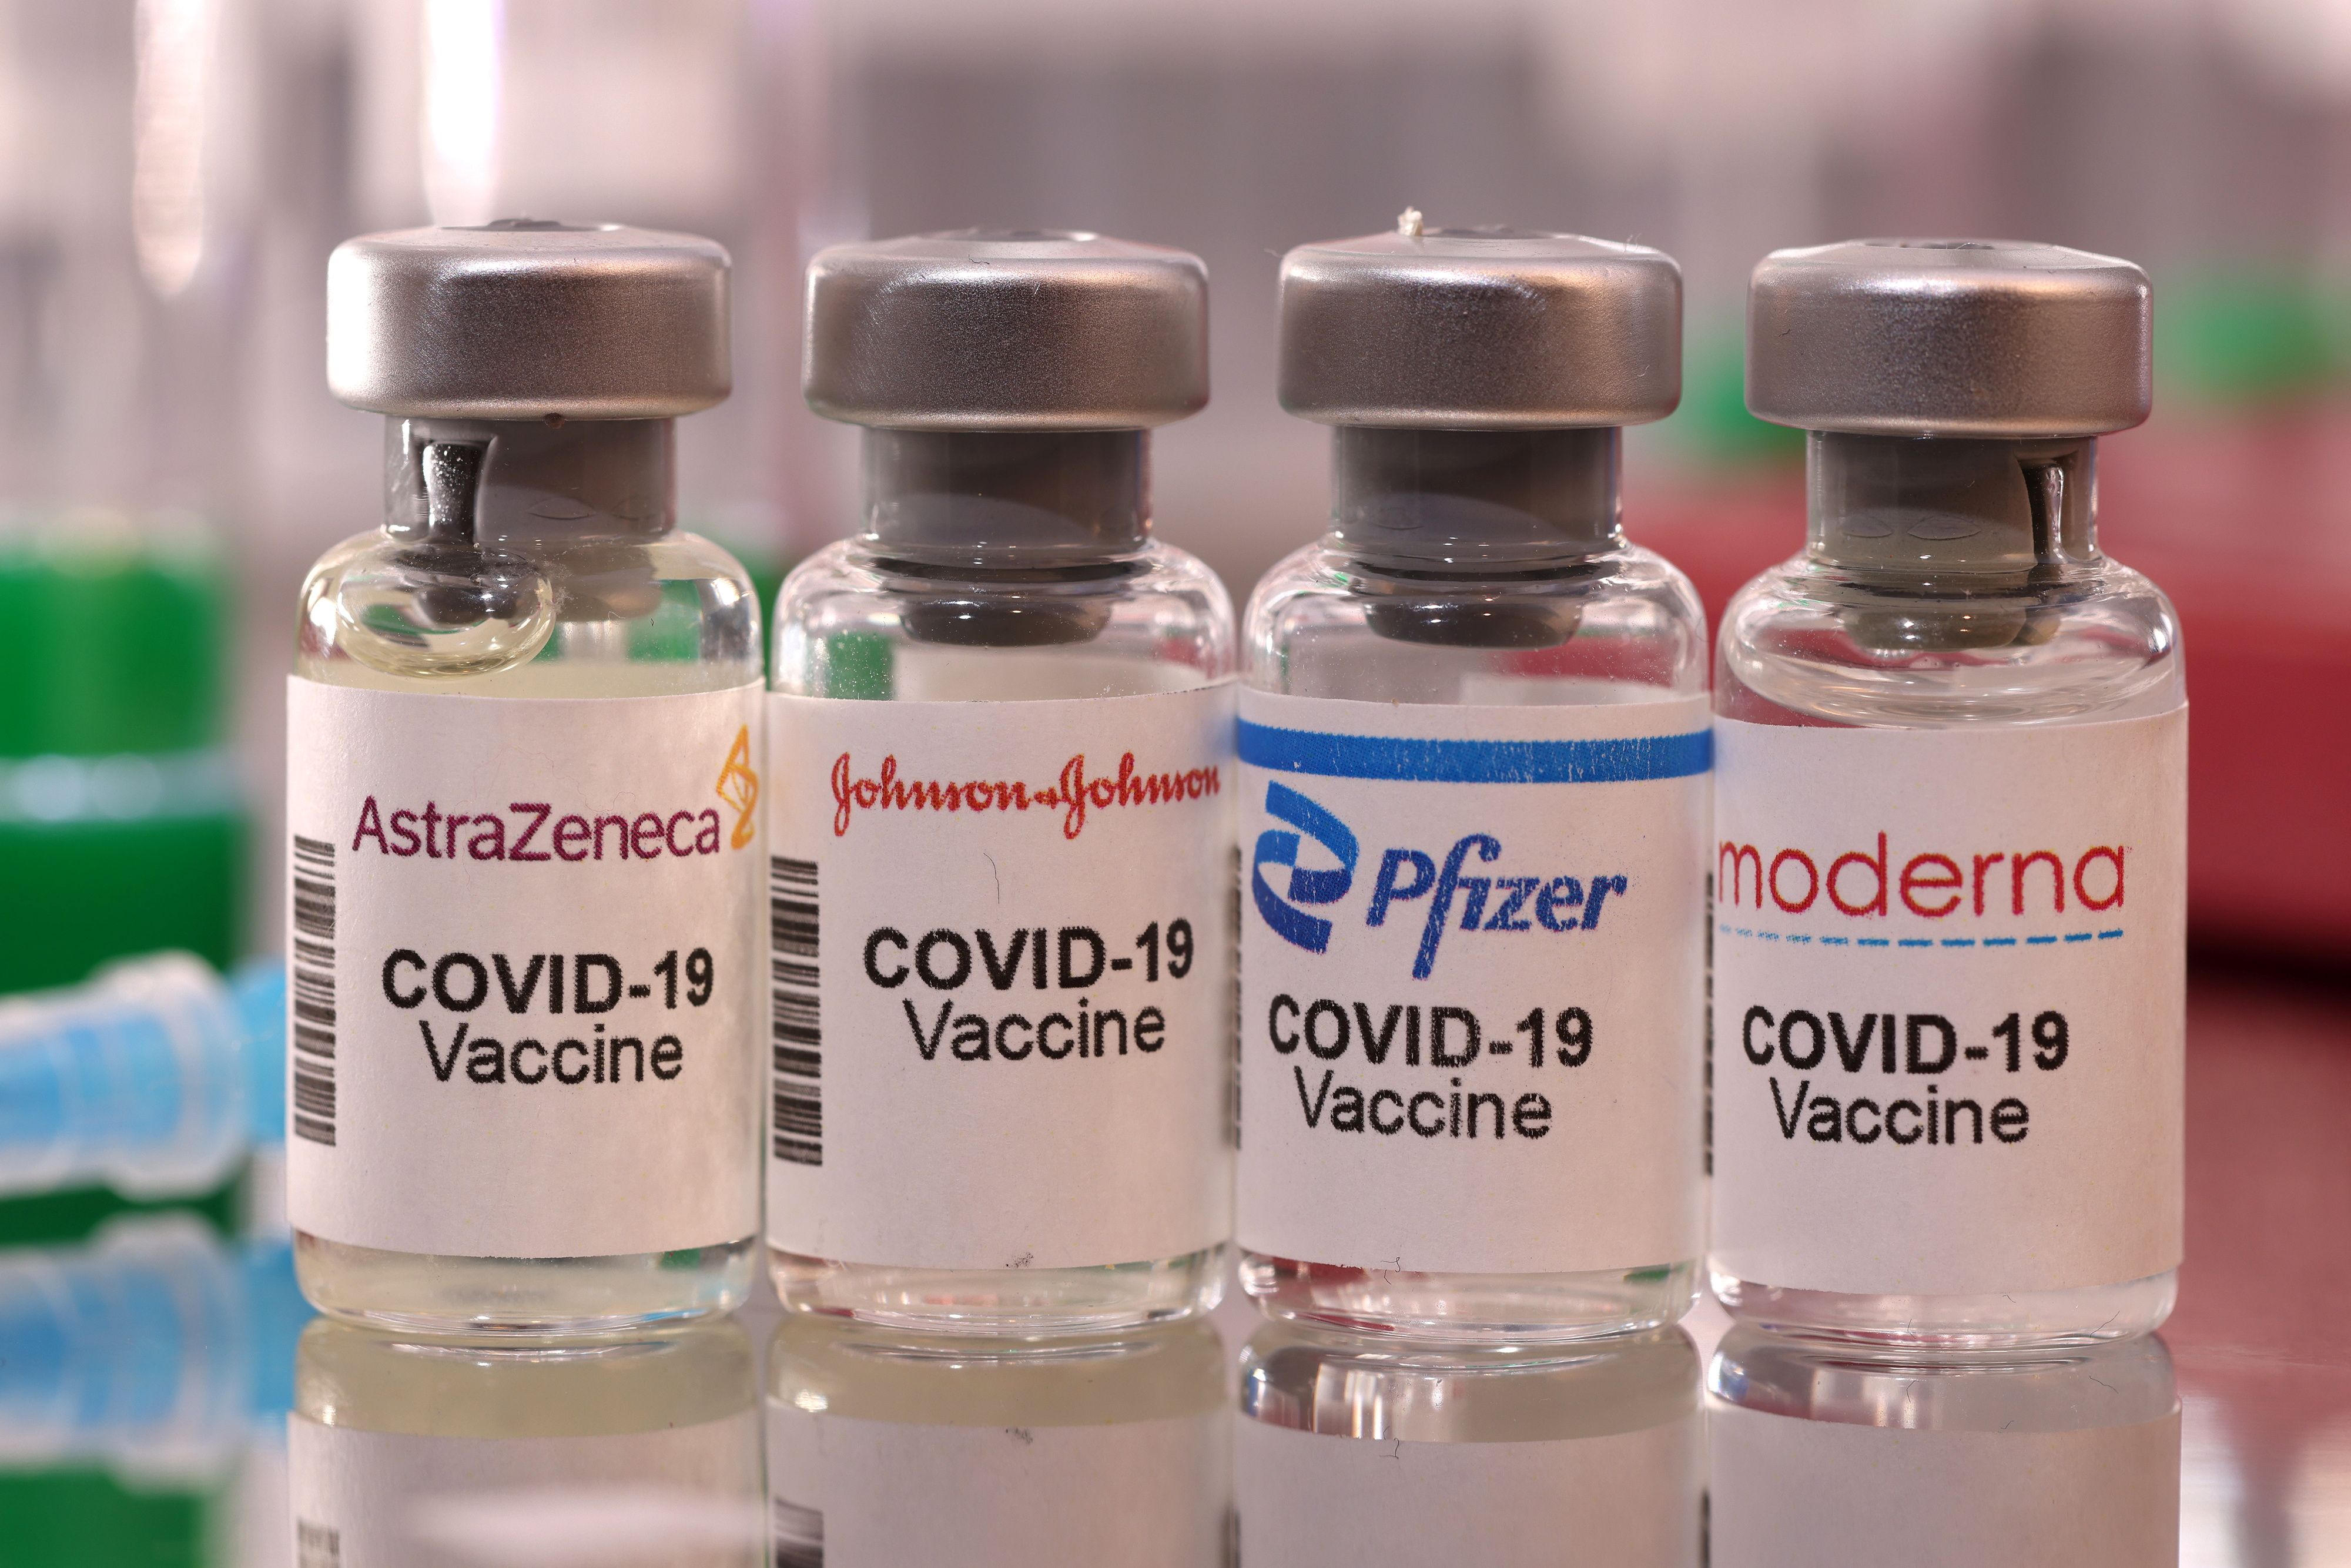 Study suggests links between COVID vaccines and minor uptick in heart, brain, and blood disorders